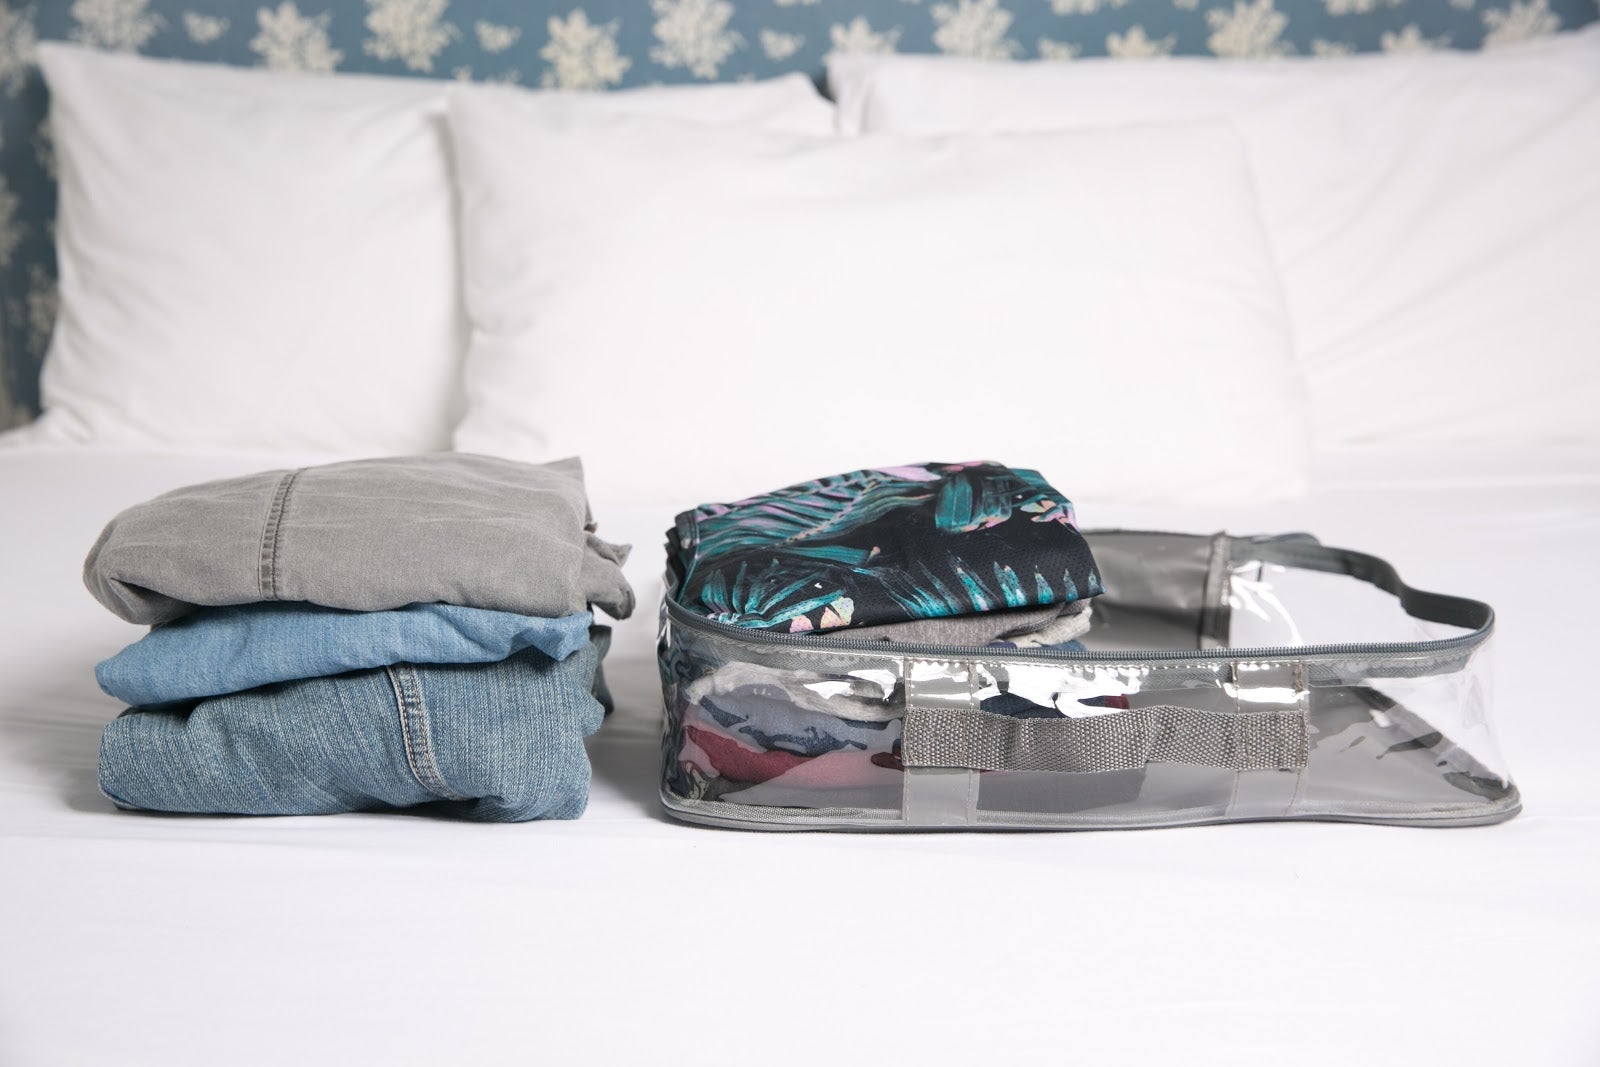 How to pack pants for travel